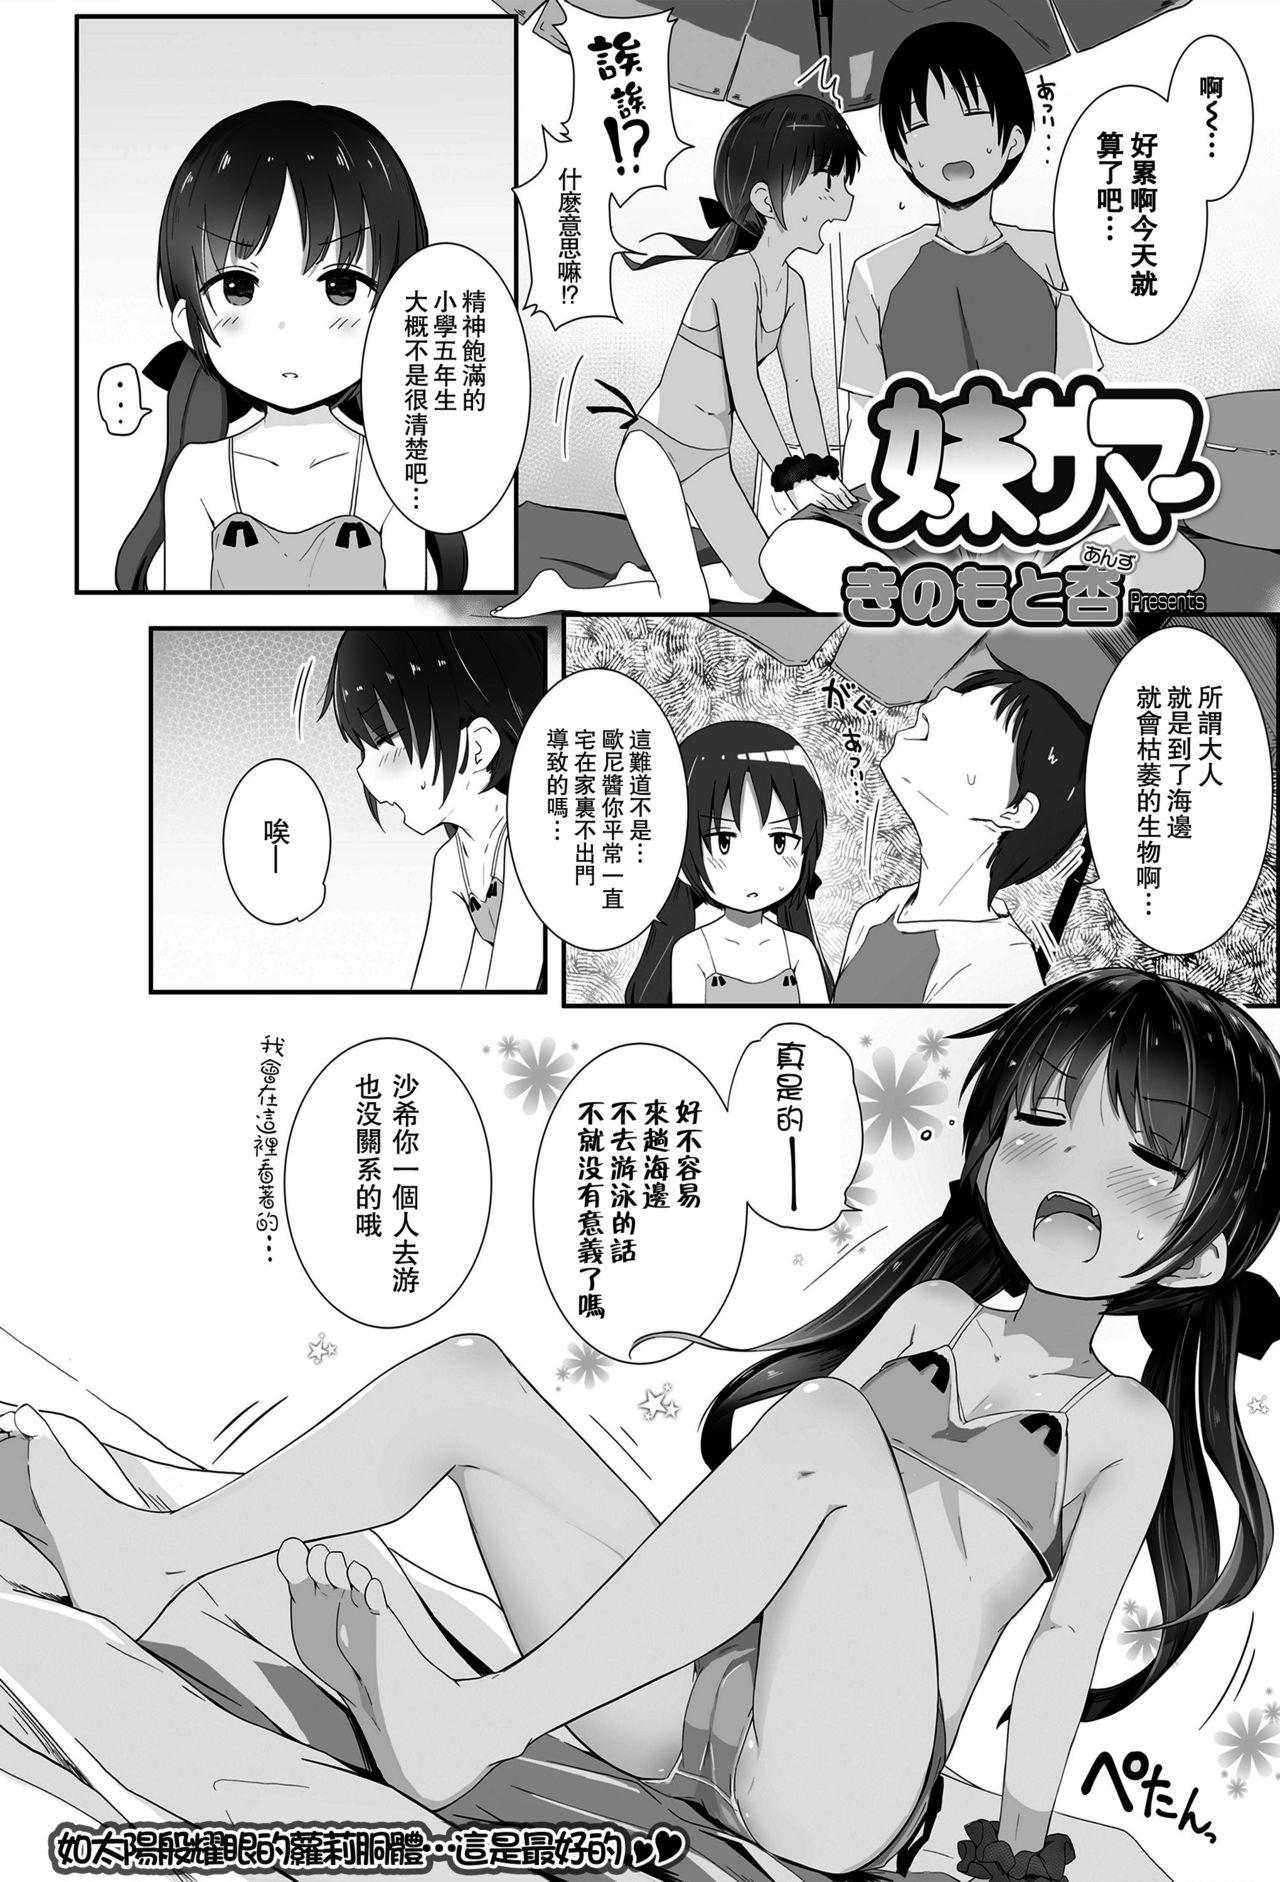 Adult Imouto Summer Latex - Page 3